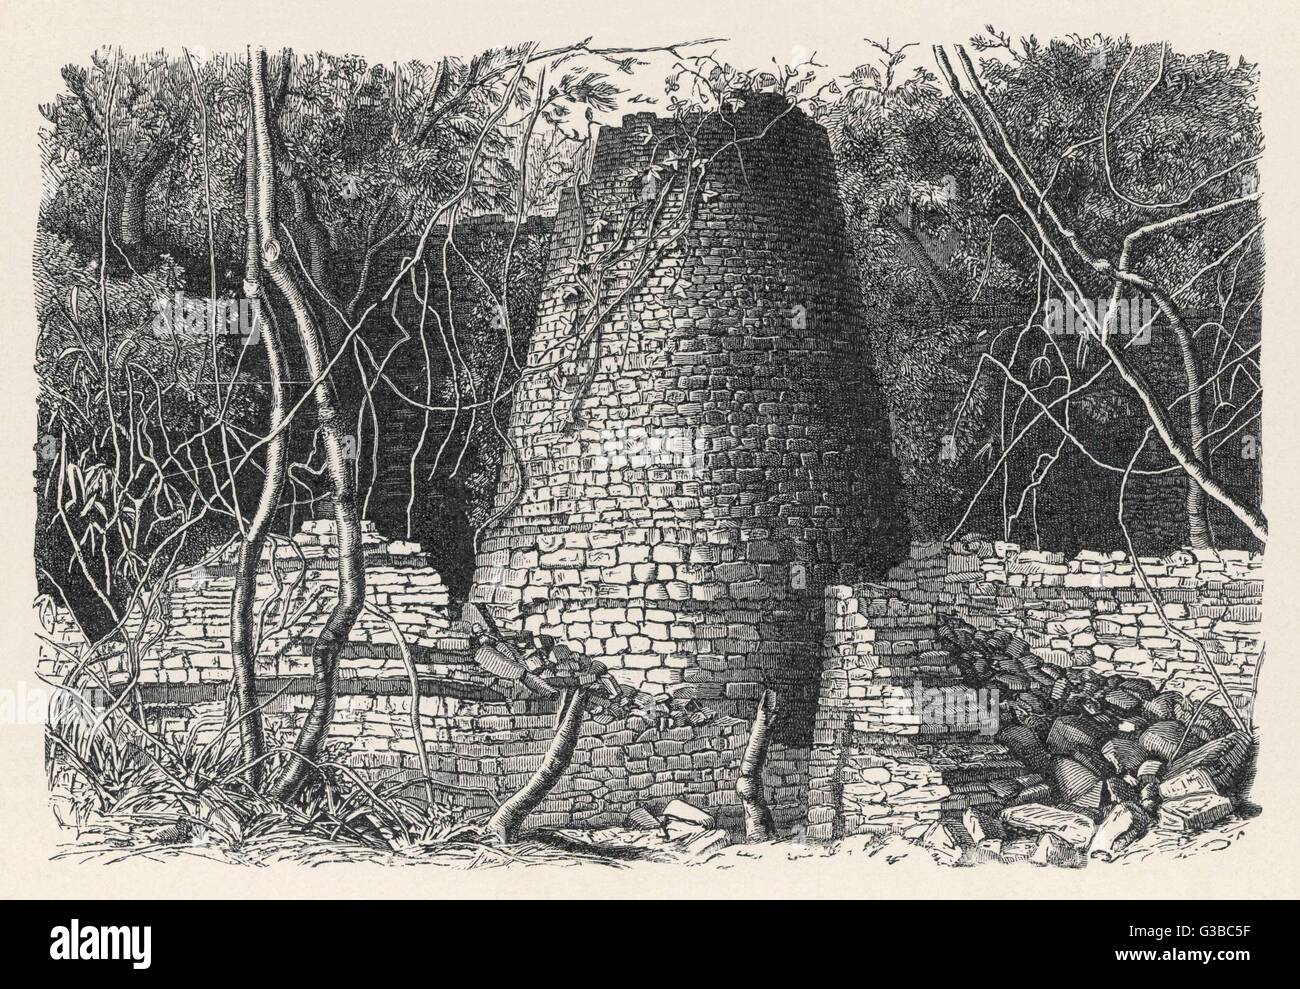 The massive conical tower in  the amazing Iron Age site of  Great Zimbabwe, the greatest  expression of the building  skills and trading wealth of  the Shona empire.     Date: 1892 Stock Photo